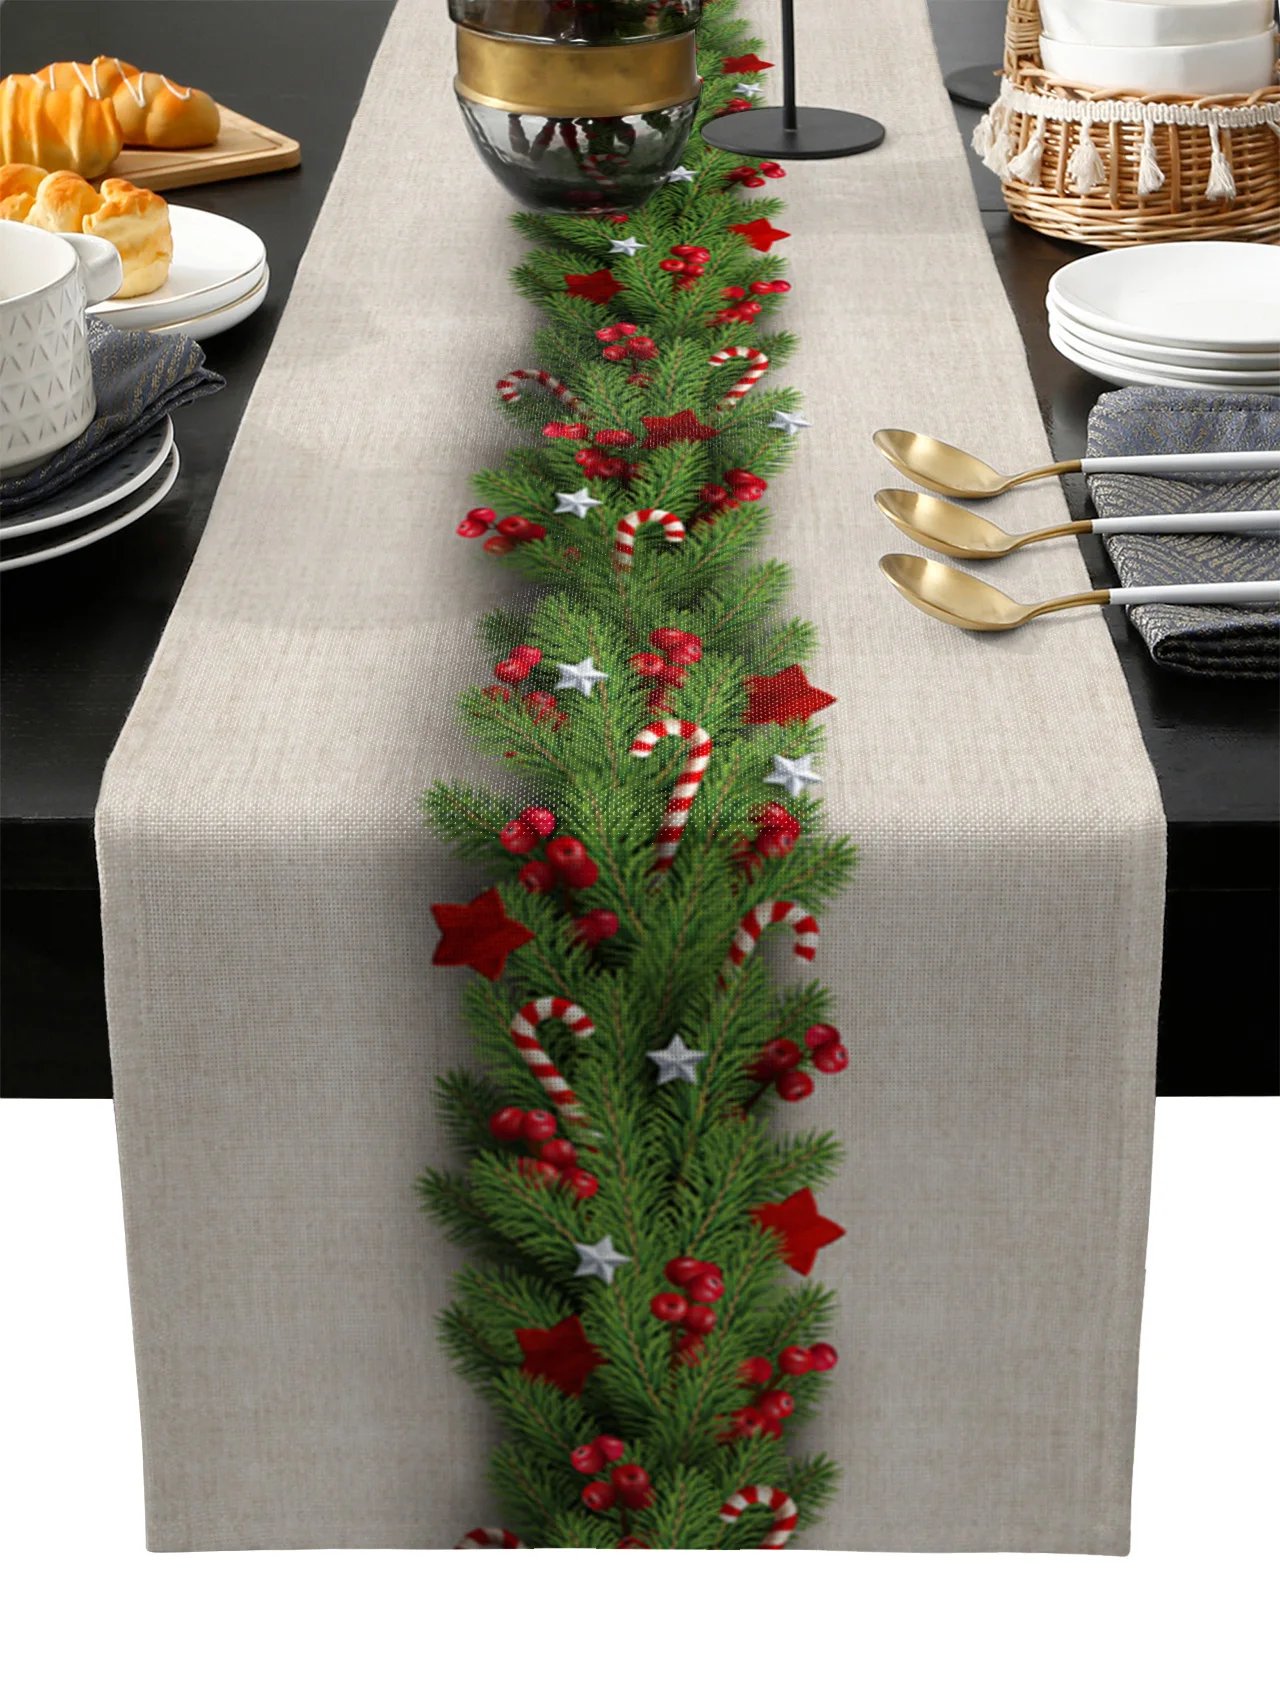 Christmas Style Table Runner Wedding Decoration Tablecloth Christmas Tree Print Decor New Year Gift Party Christmas Table Runner